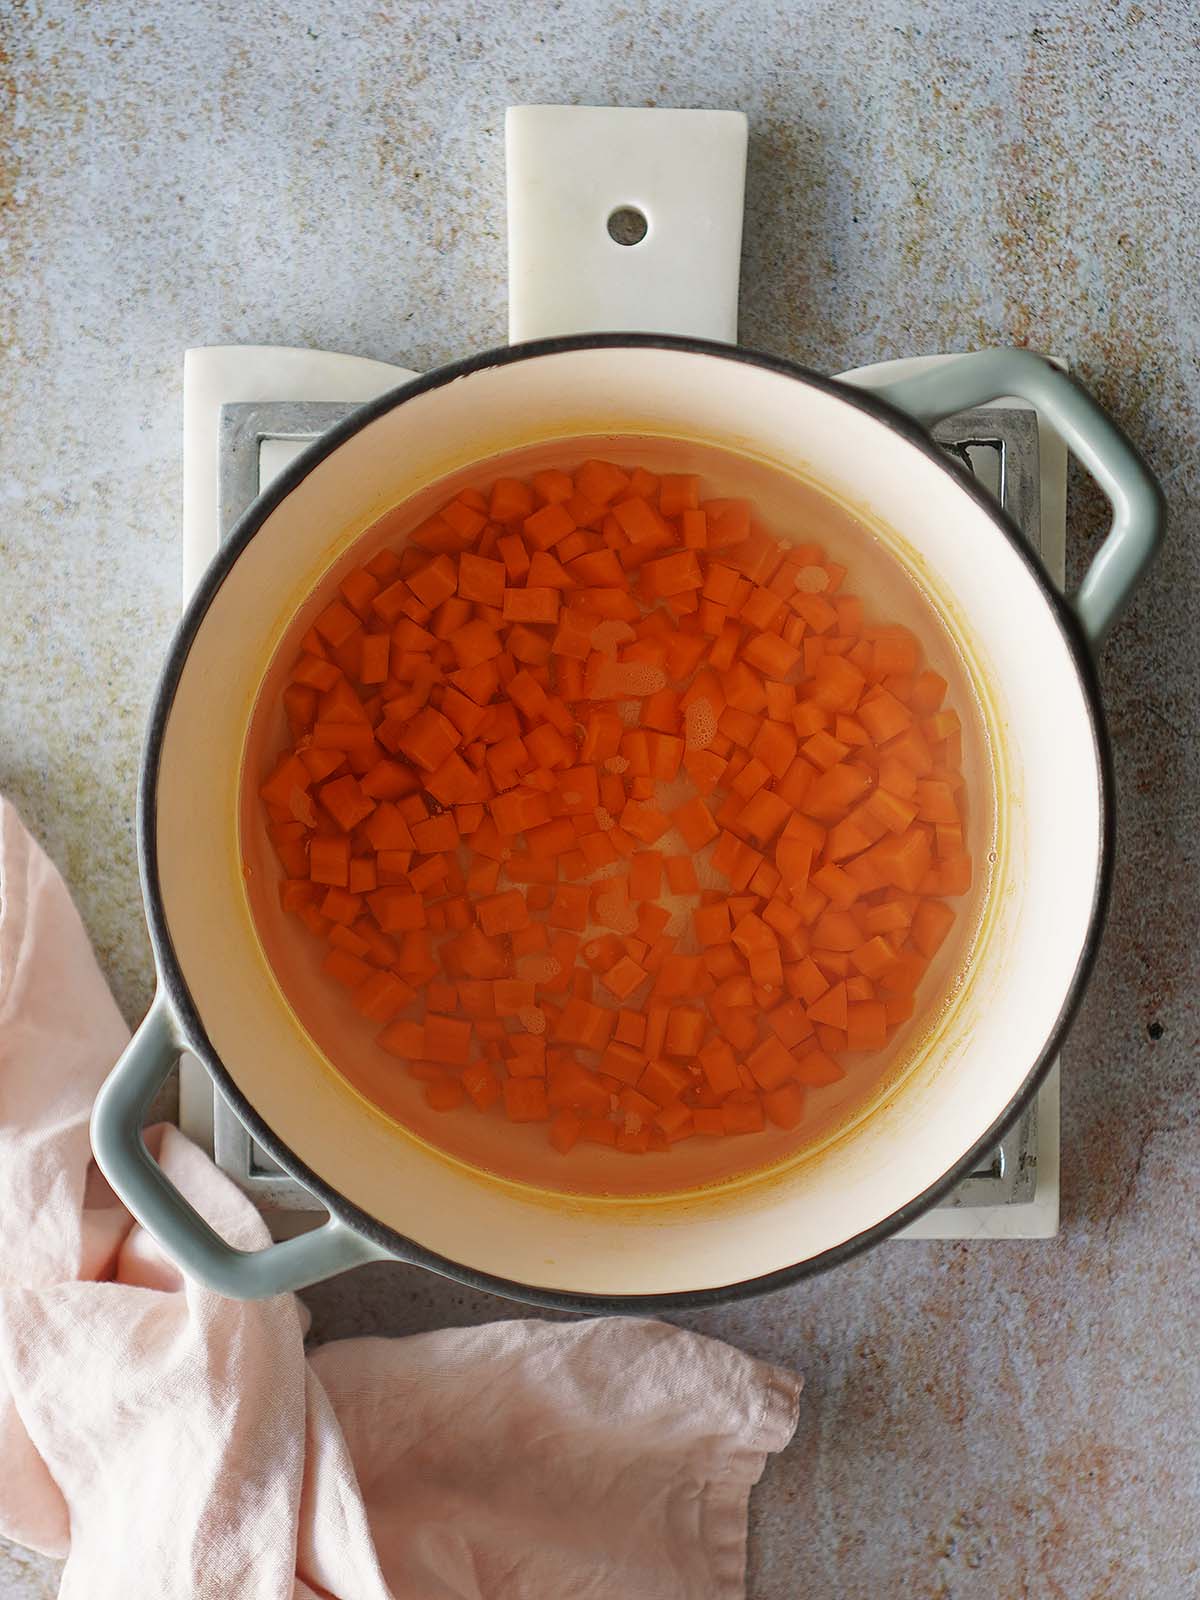 Cooked chopped carrots inside a small saucepan.